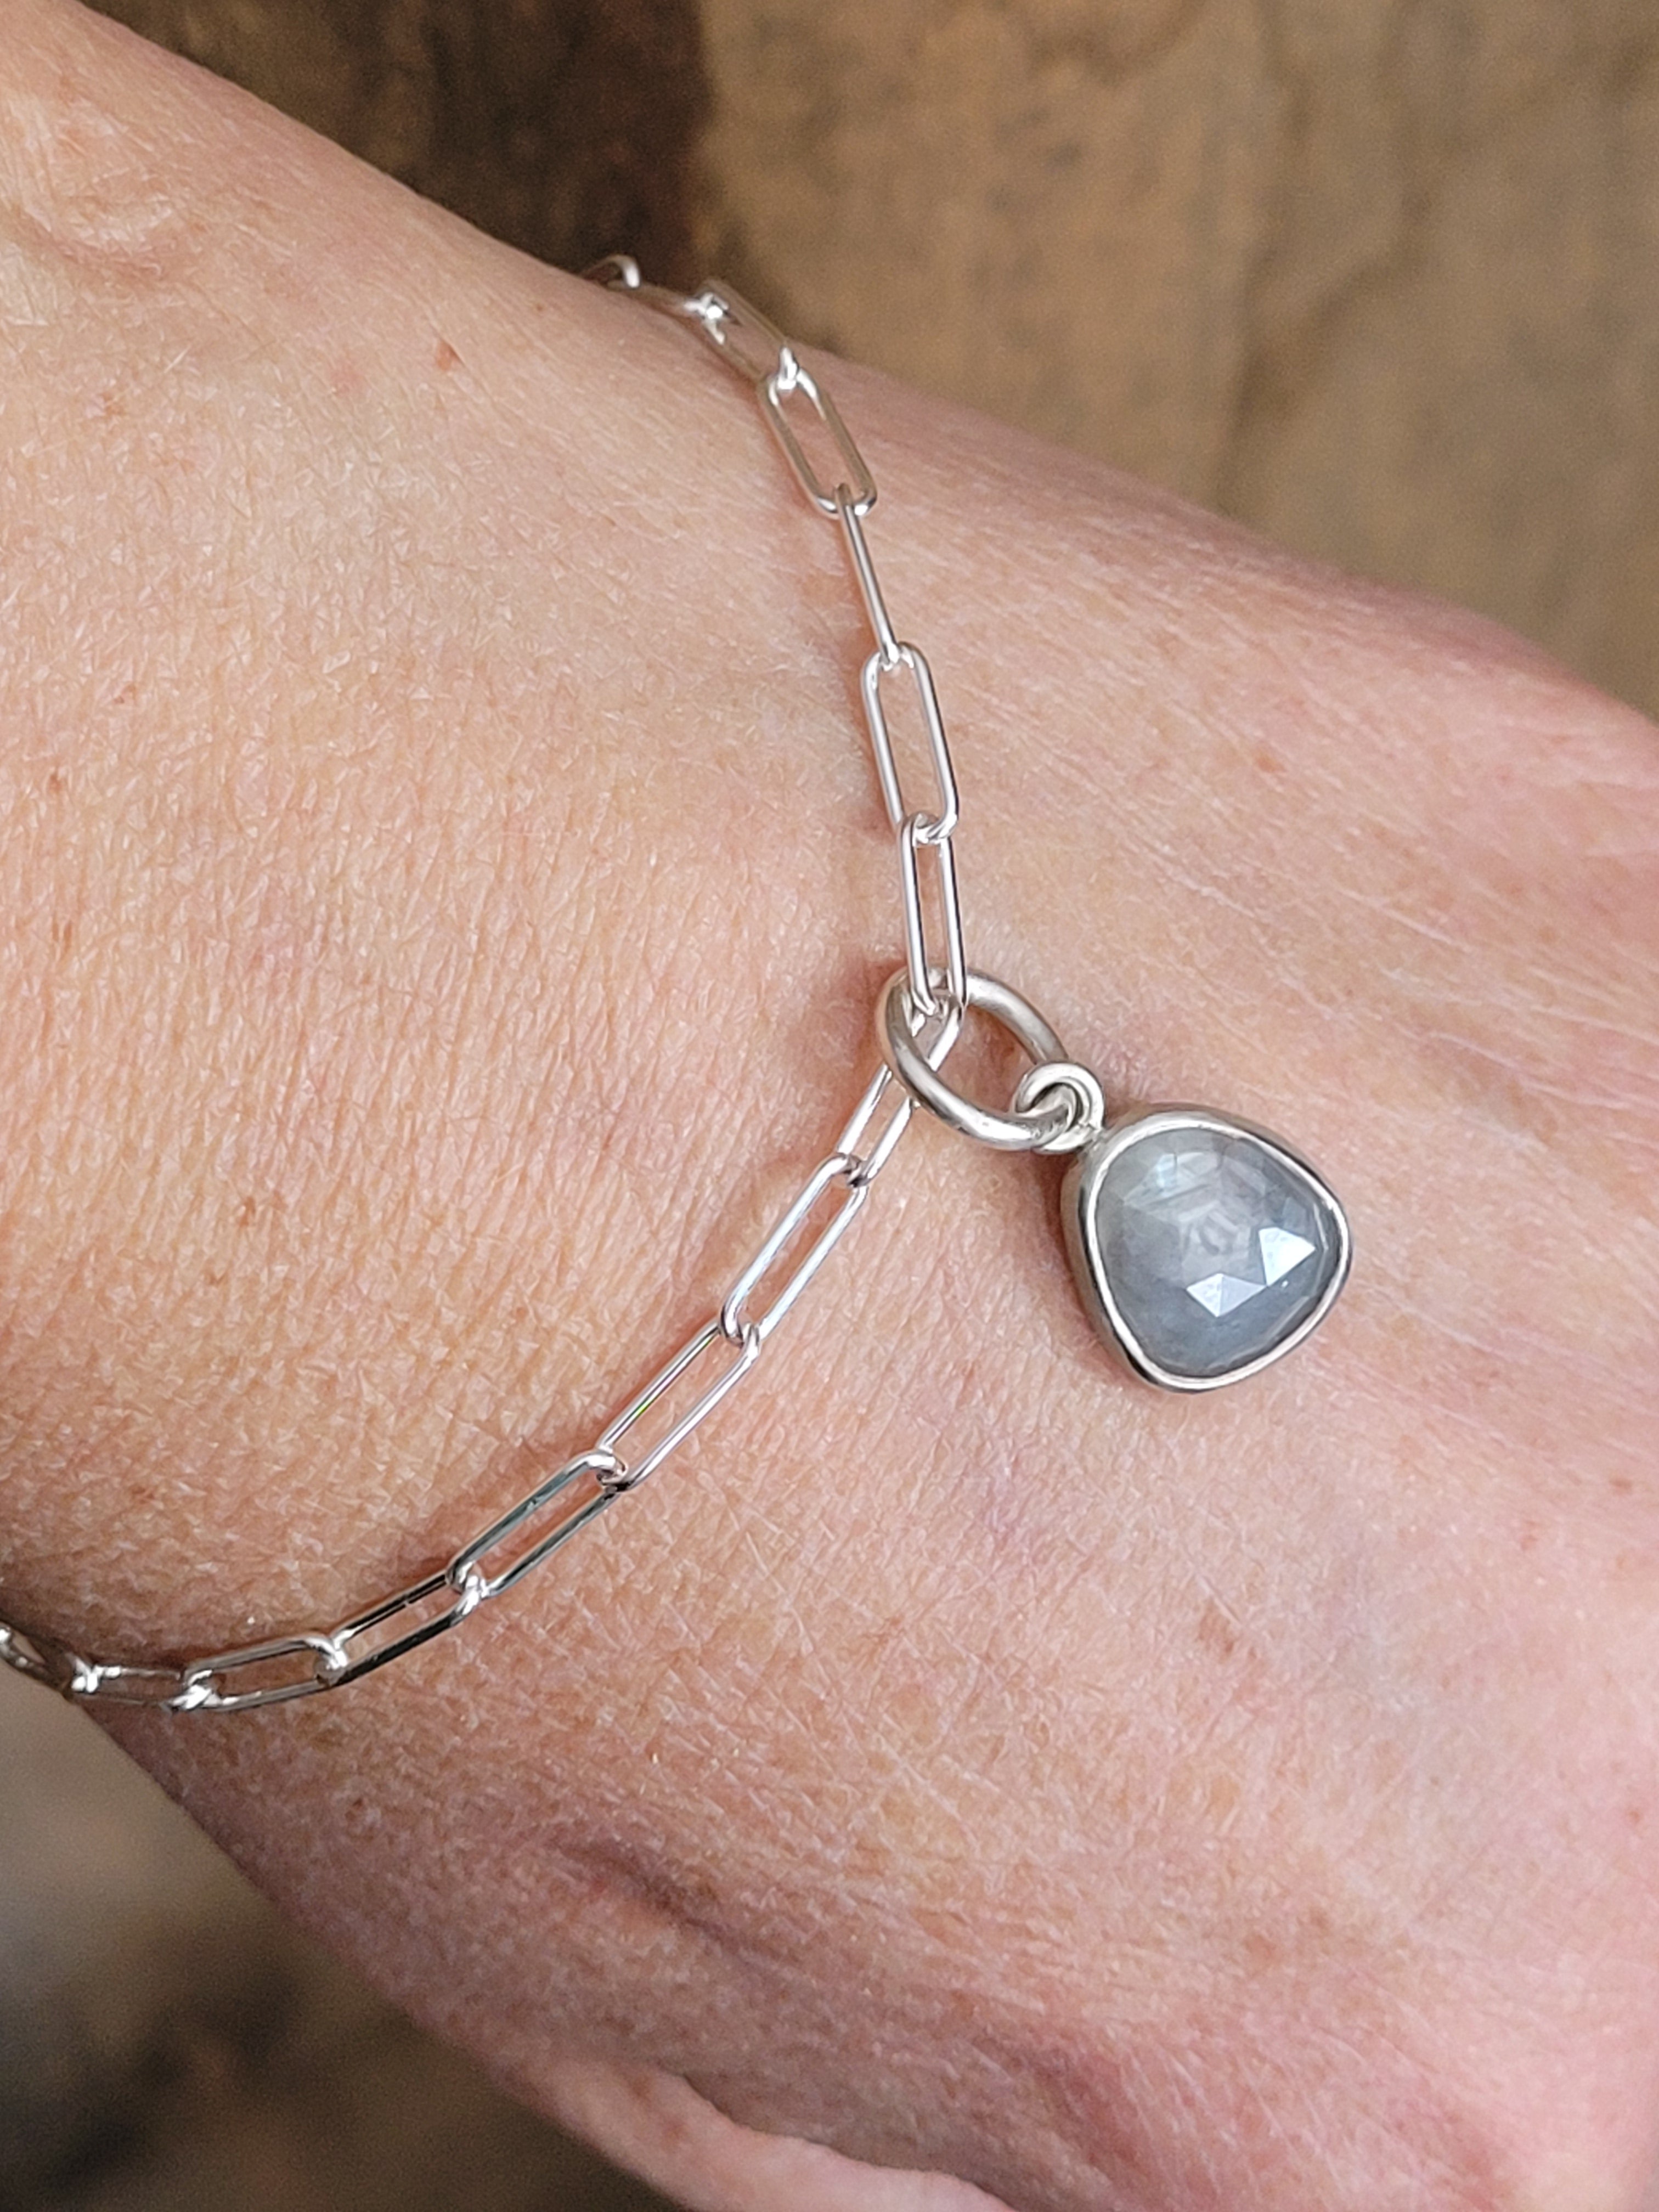 Natural Gray Rosecut Sapphire charm set in Sterling Silver on a Paperclip Bracelet or Necklace